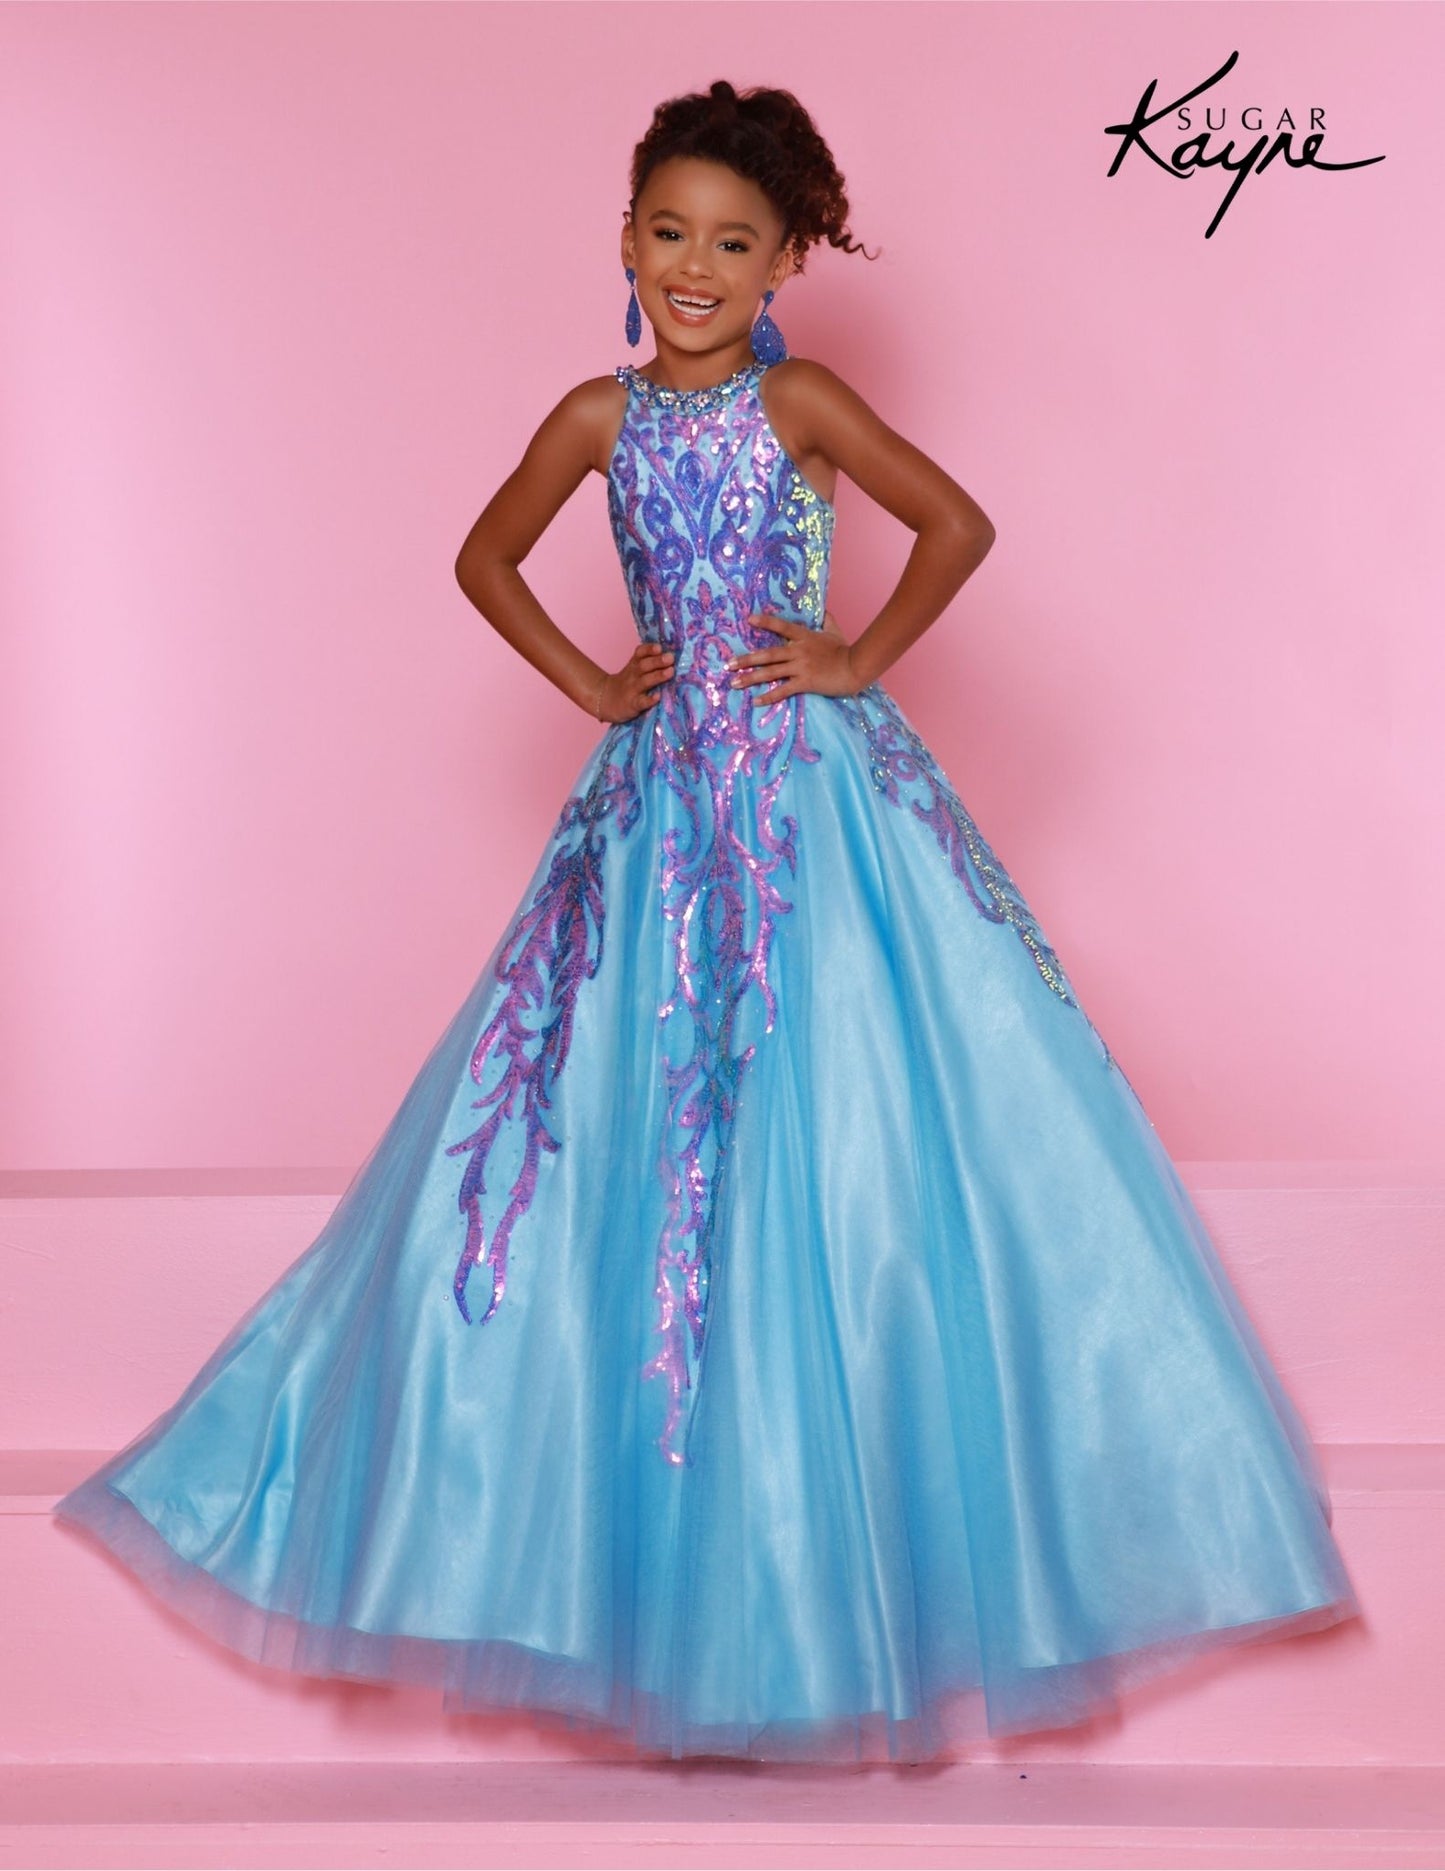 This Sugar Kayne C344 Preteen Pageant Dress is the perfect choice for any special occasion. The dress features a halter neckline, a glittering sequin bodice, and an A-line skirt. Its classic design and streamlined silhouette bring a timeless elegance to any event. Glittering Grace! This Sequin Mesh Ballgown and halter-style neckline ensure you will captivate the audience with grace and style!